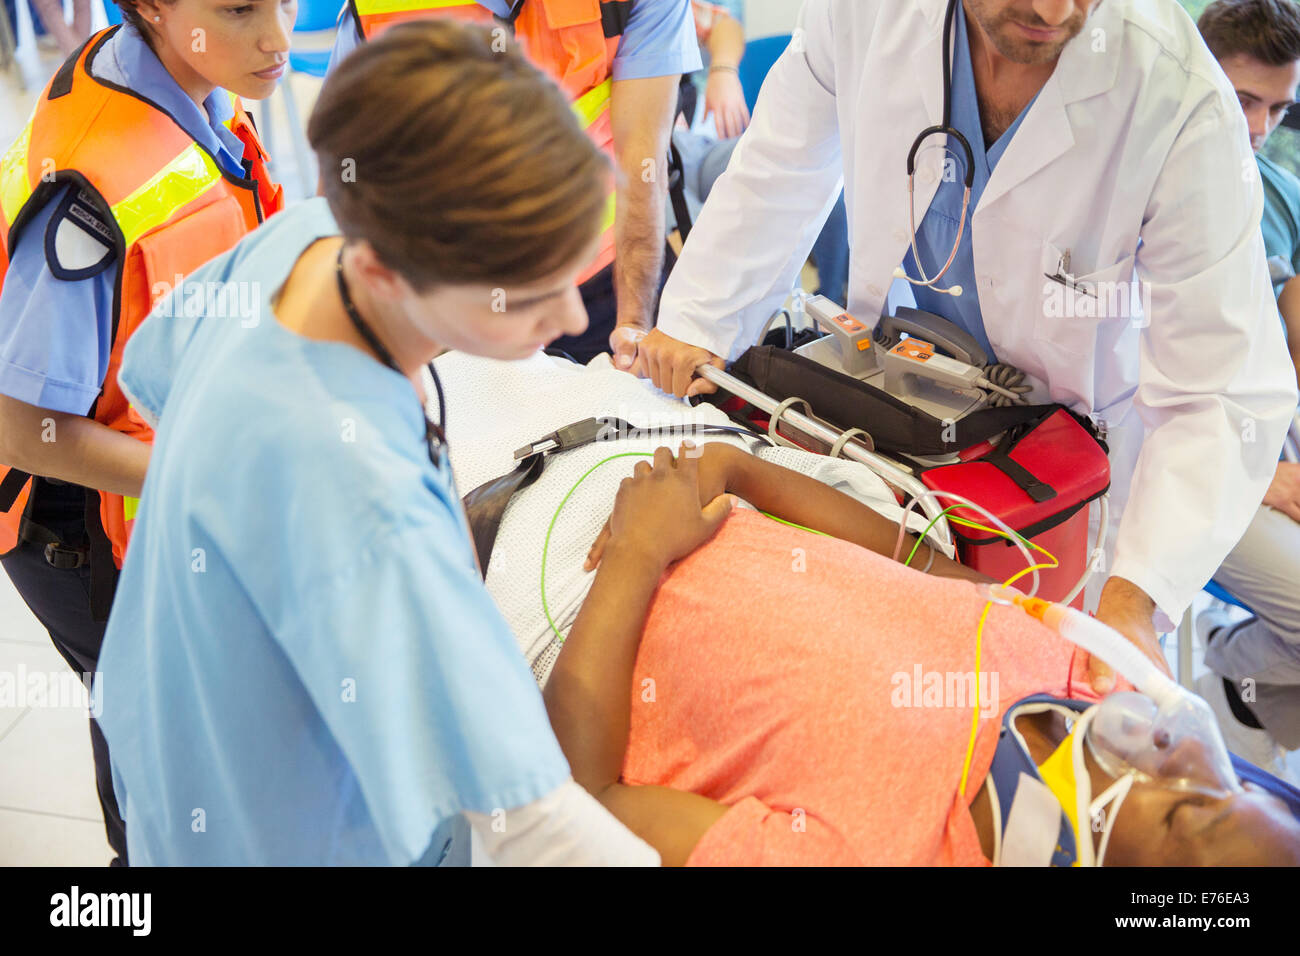 Doctor, nurse and paramedics examining patient on stretcher Stock Photo